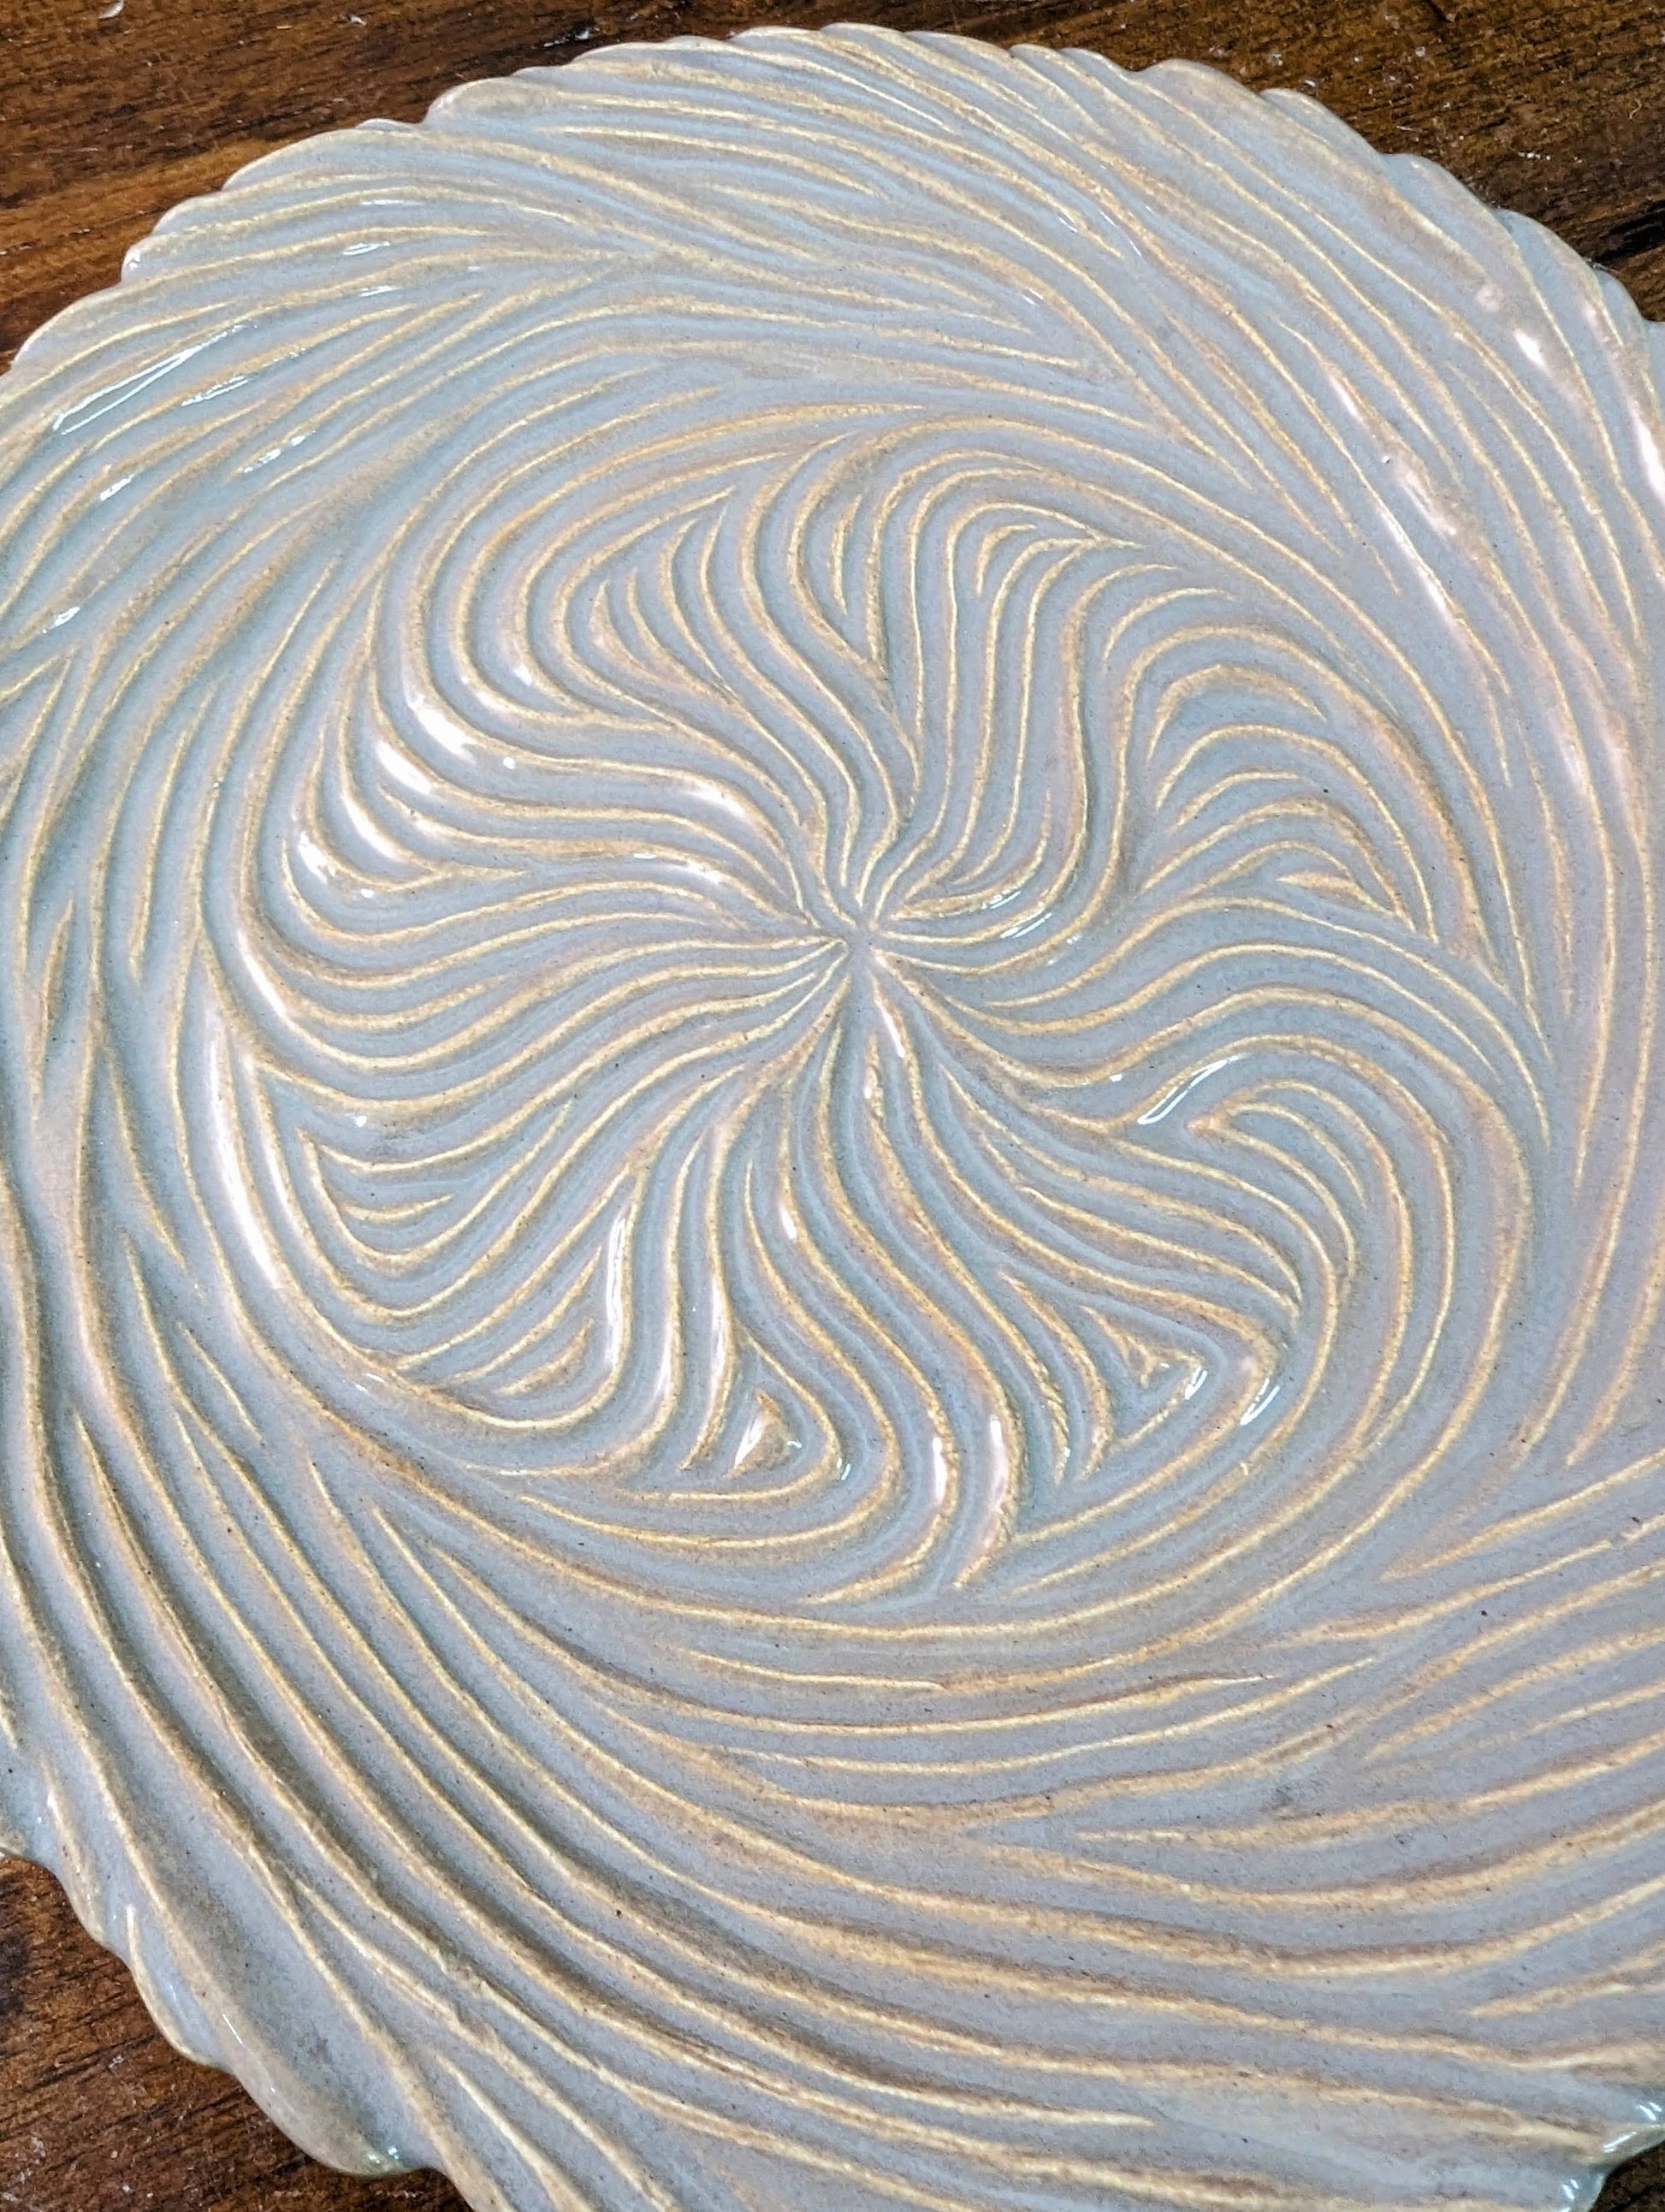 Storm-Cloud Whirlpool Portal Plate - Blue grey with light brown on the high points